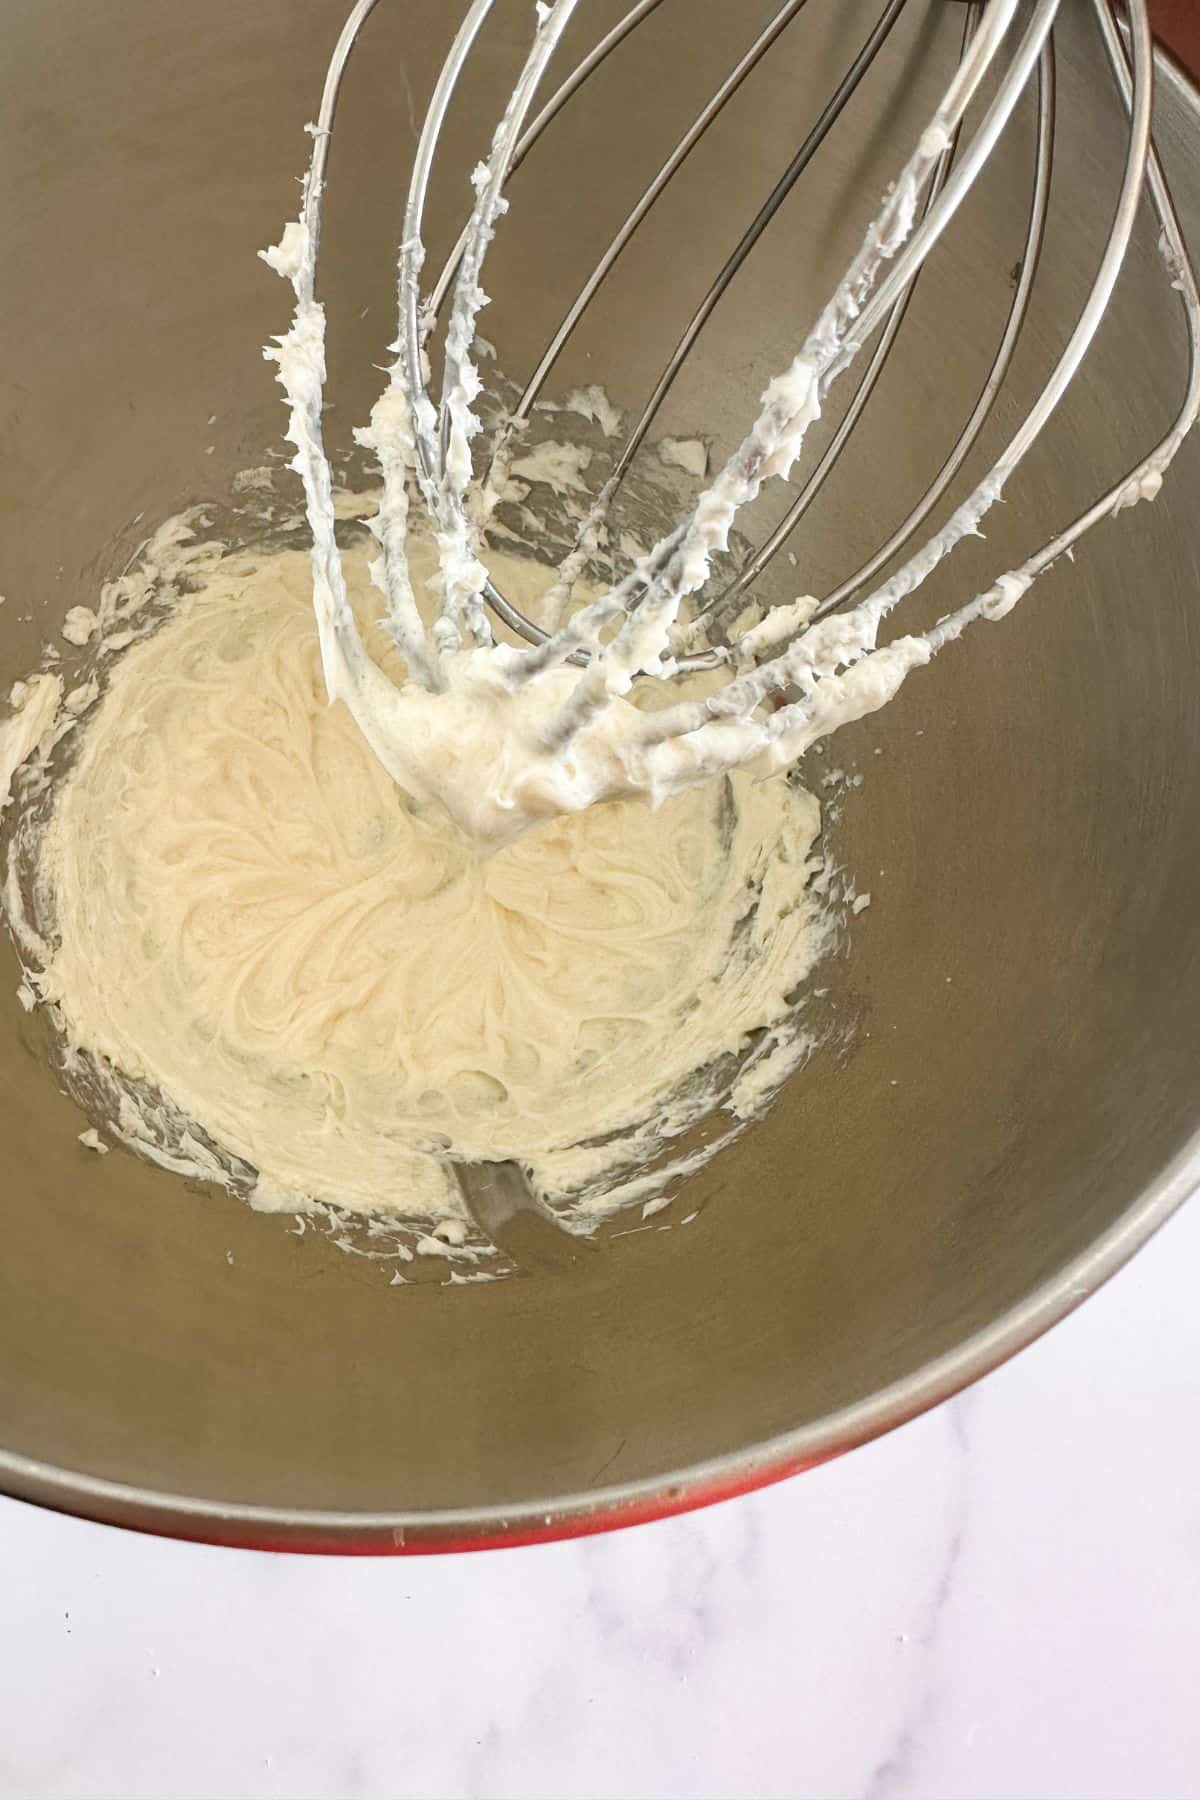 Sweet cream cheese filling in a stand mixer.